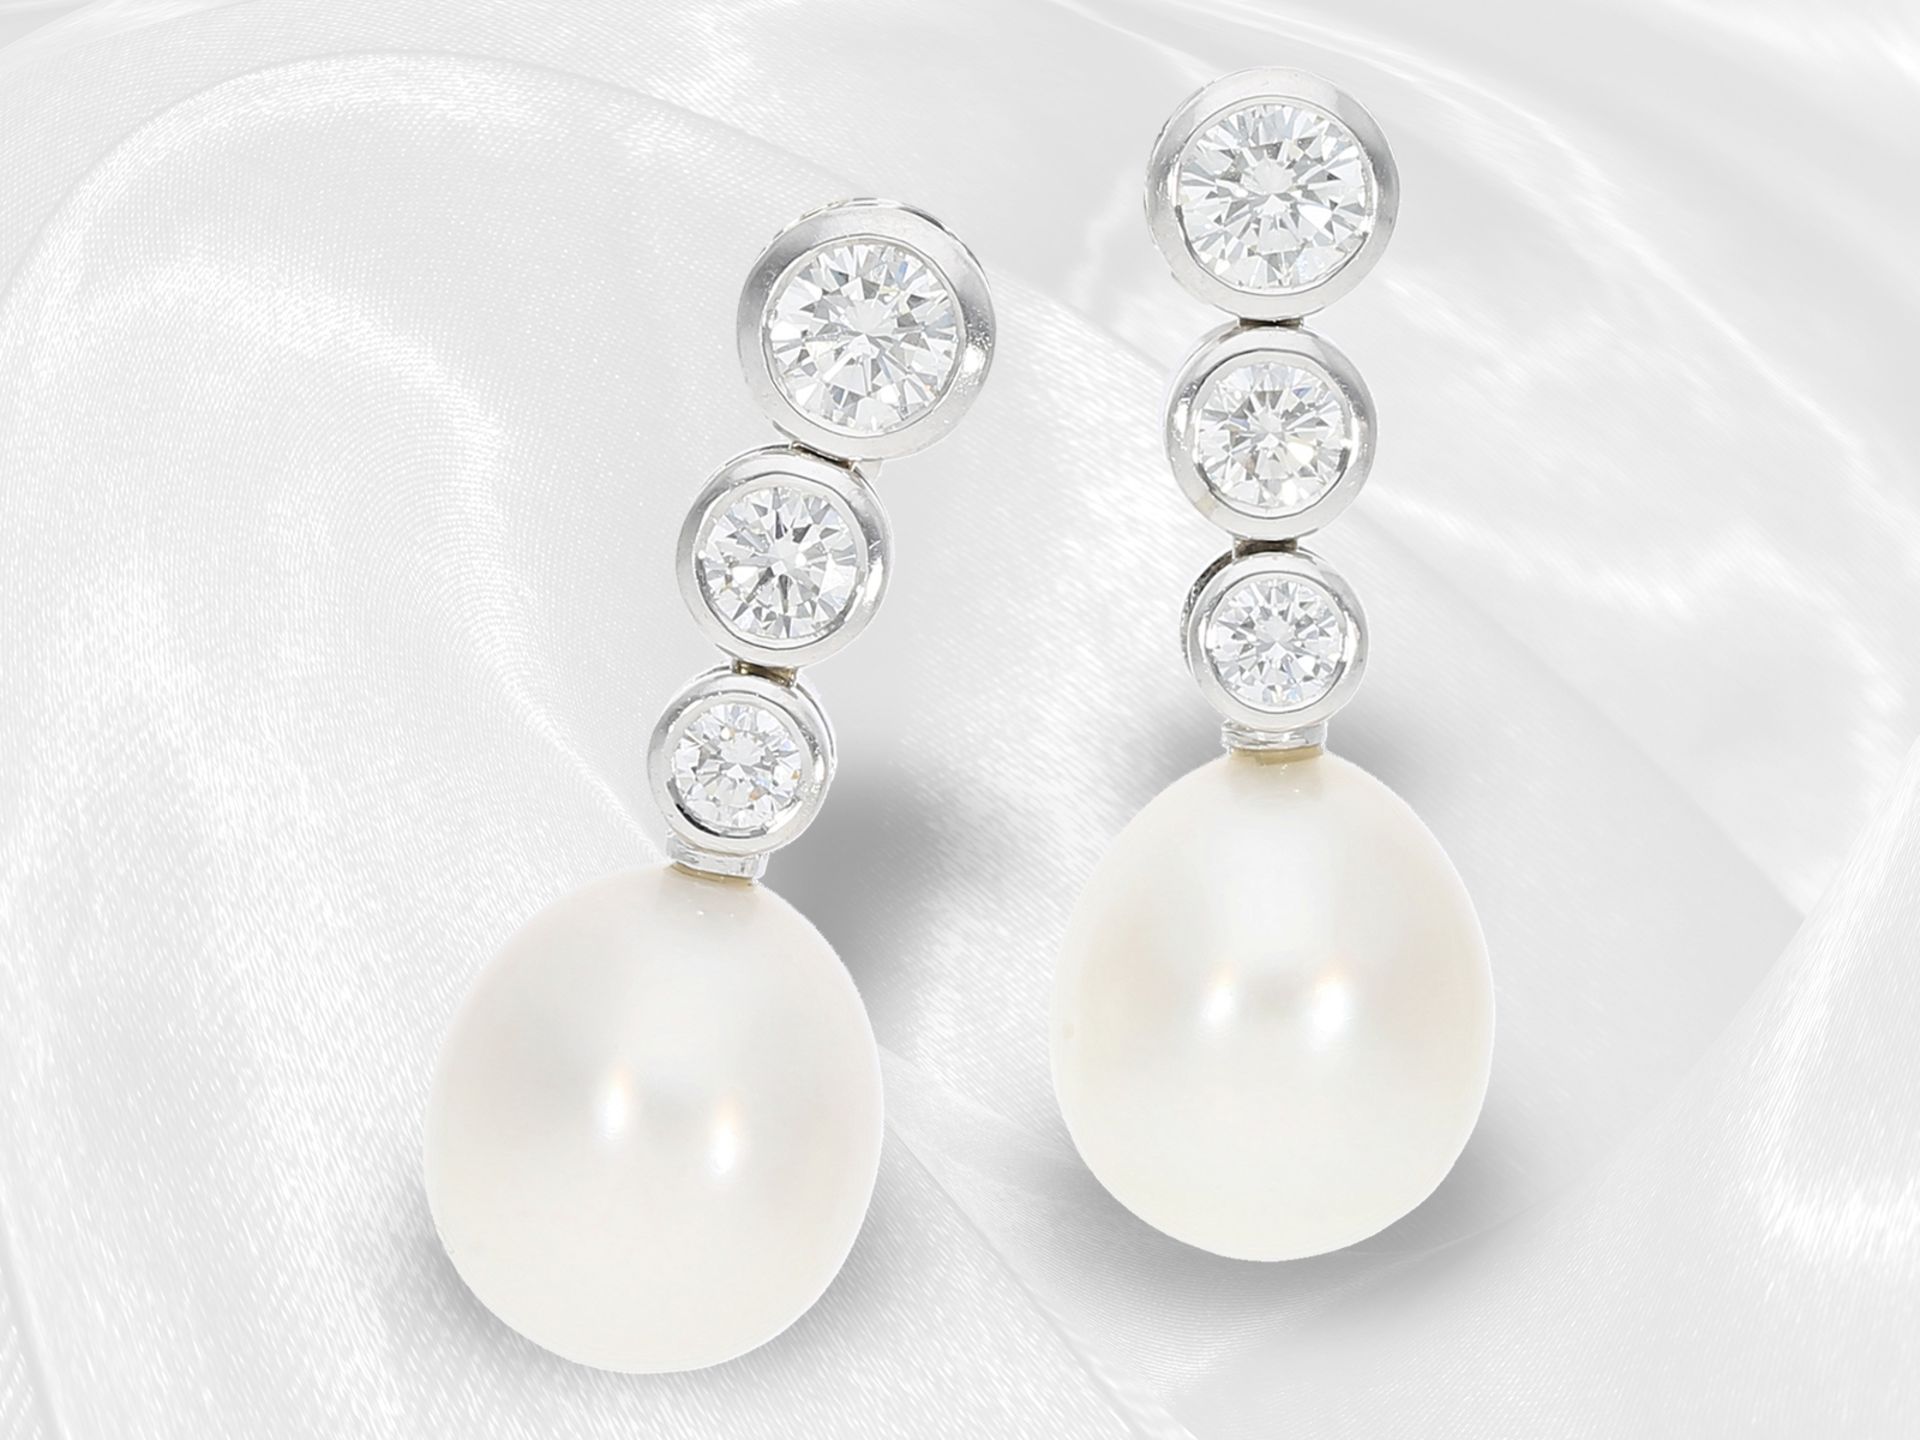 Earrings: decorative, very high quality vintage stud earrings with fine diamonds and cultured pearls